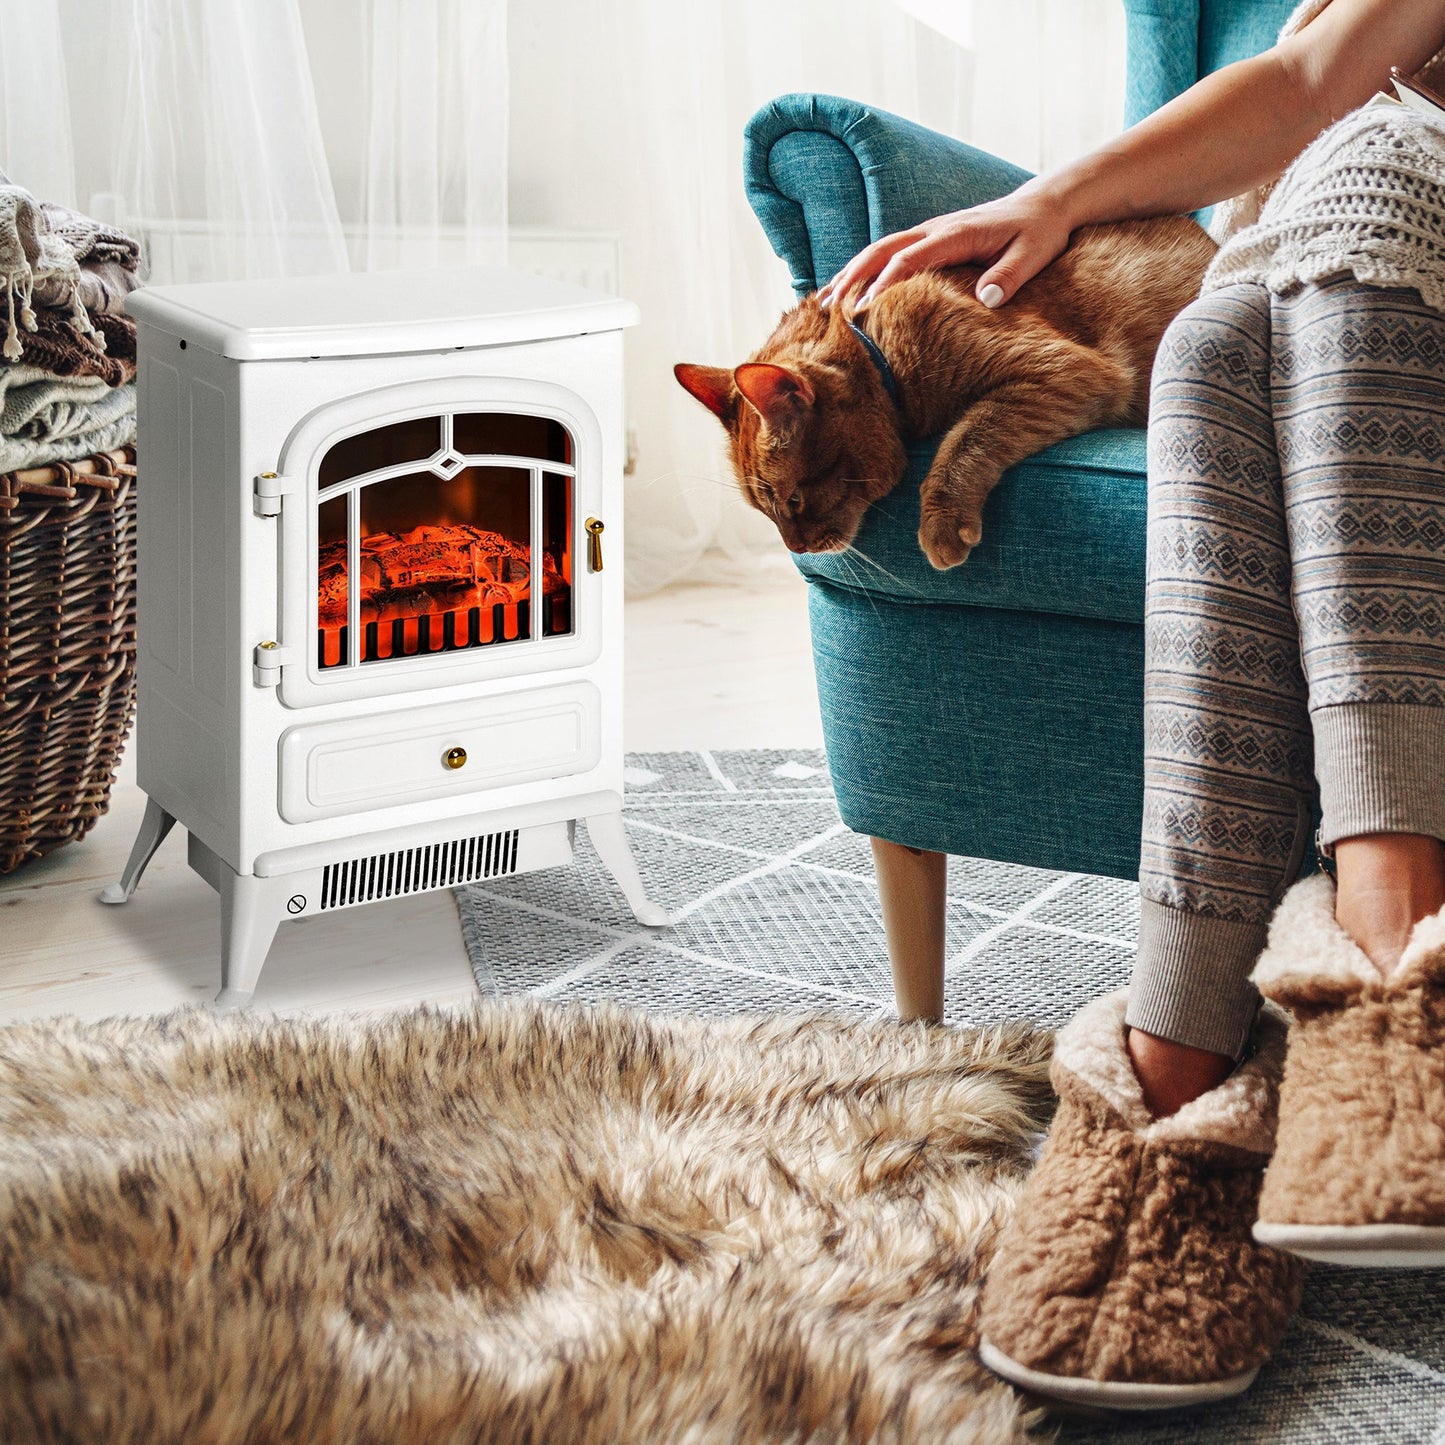 Miscellaneous-Electric Fireplace Heater, White Fireplace Stove with Realistic LED Log Flames and Overheating Safety Protection, 750/1500W - Outdoor Style Company